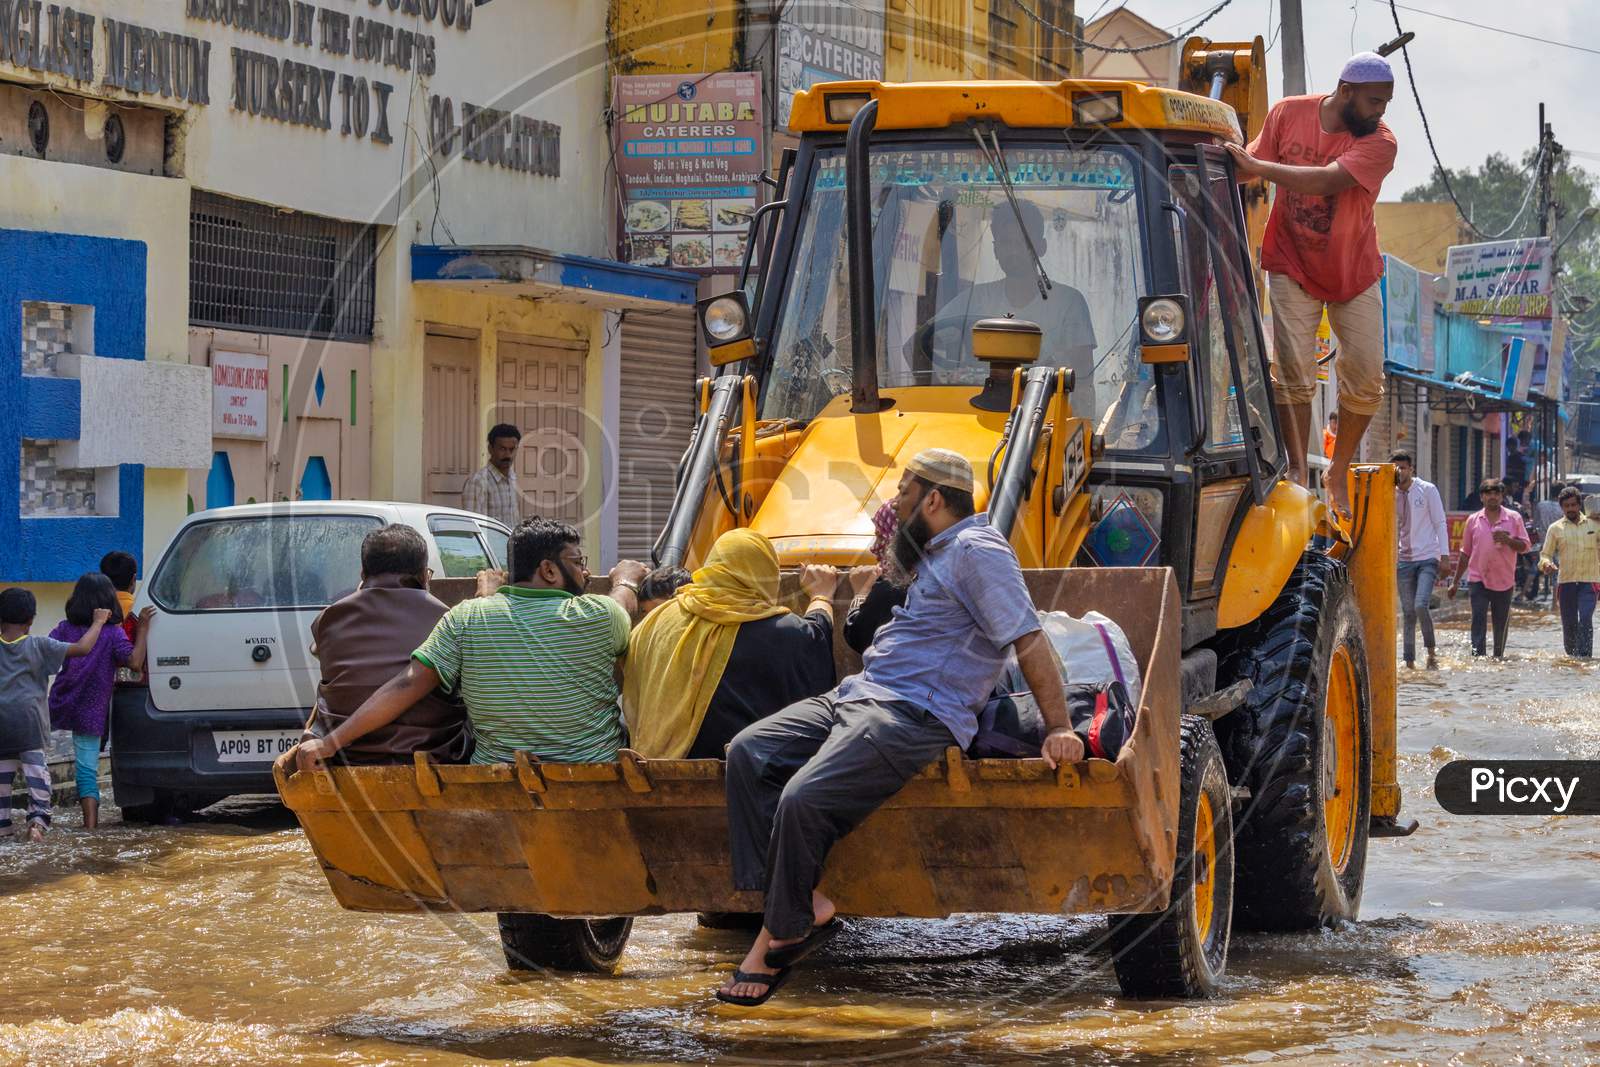 JCB carrying people in the flood water occupied streets in the Hafiz Baba Nagar due to Hyderabad floods